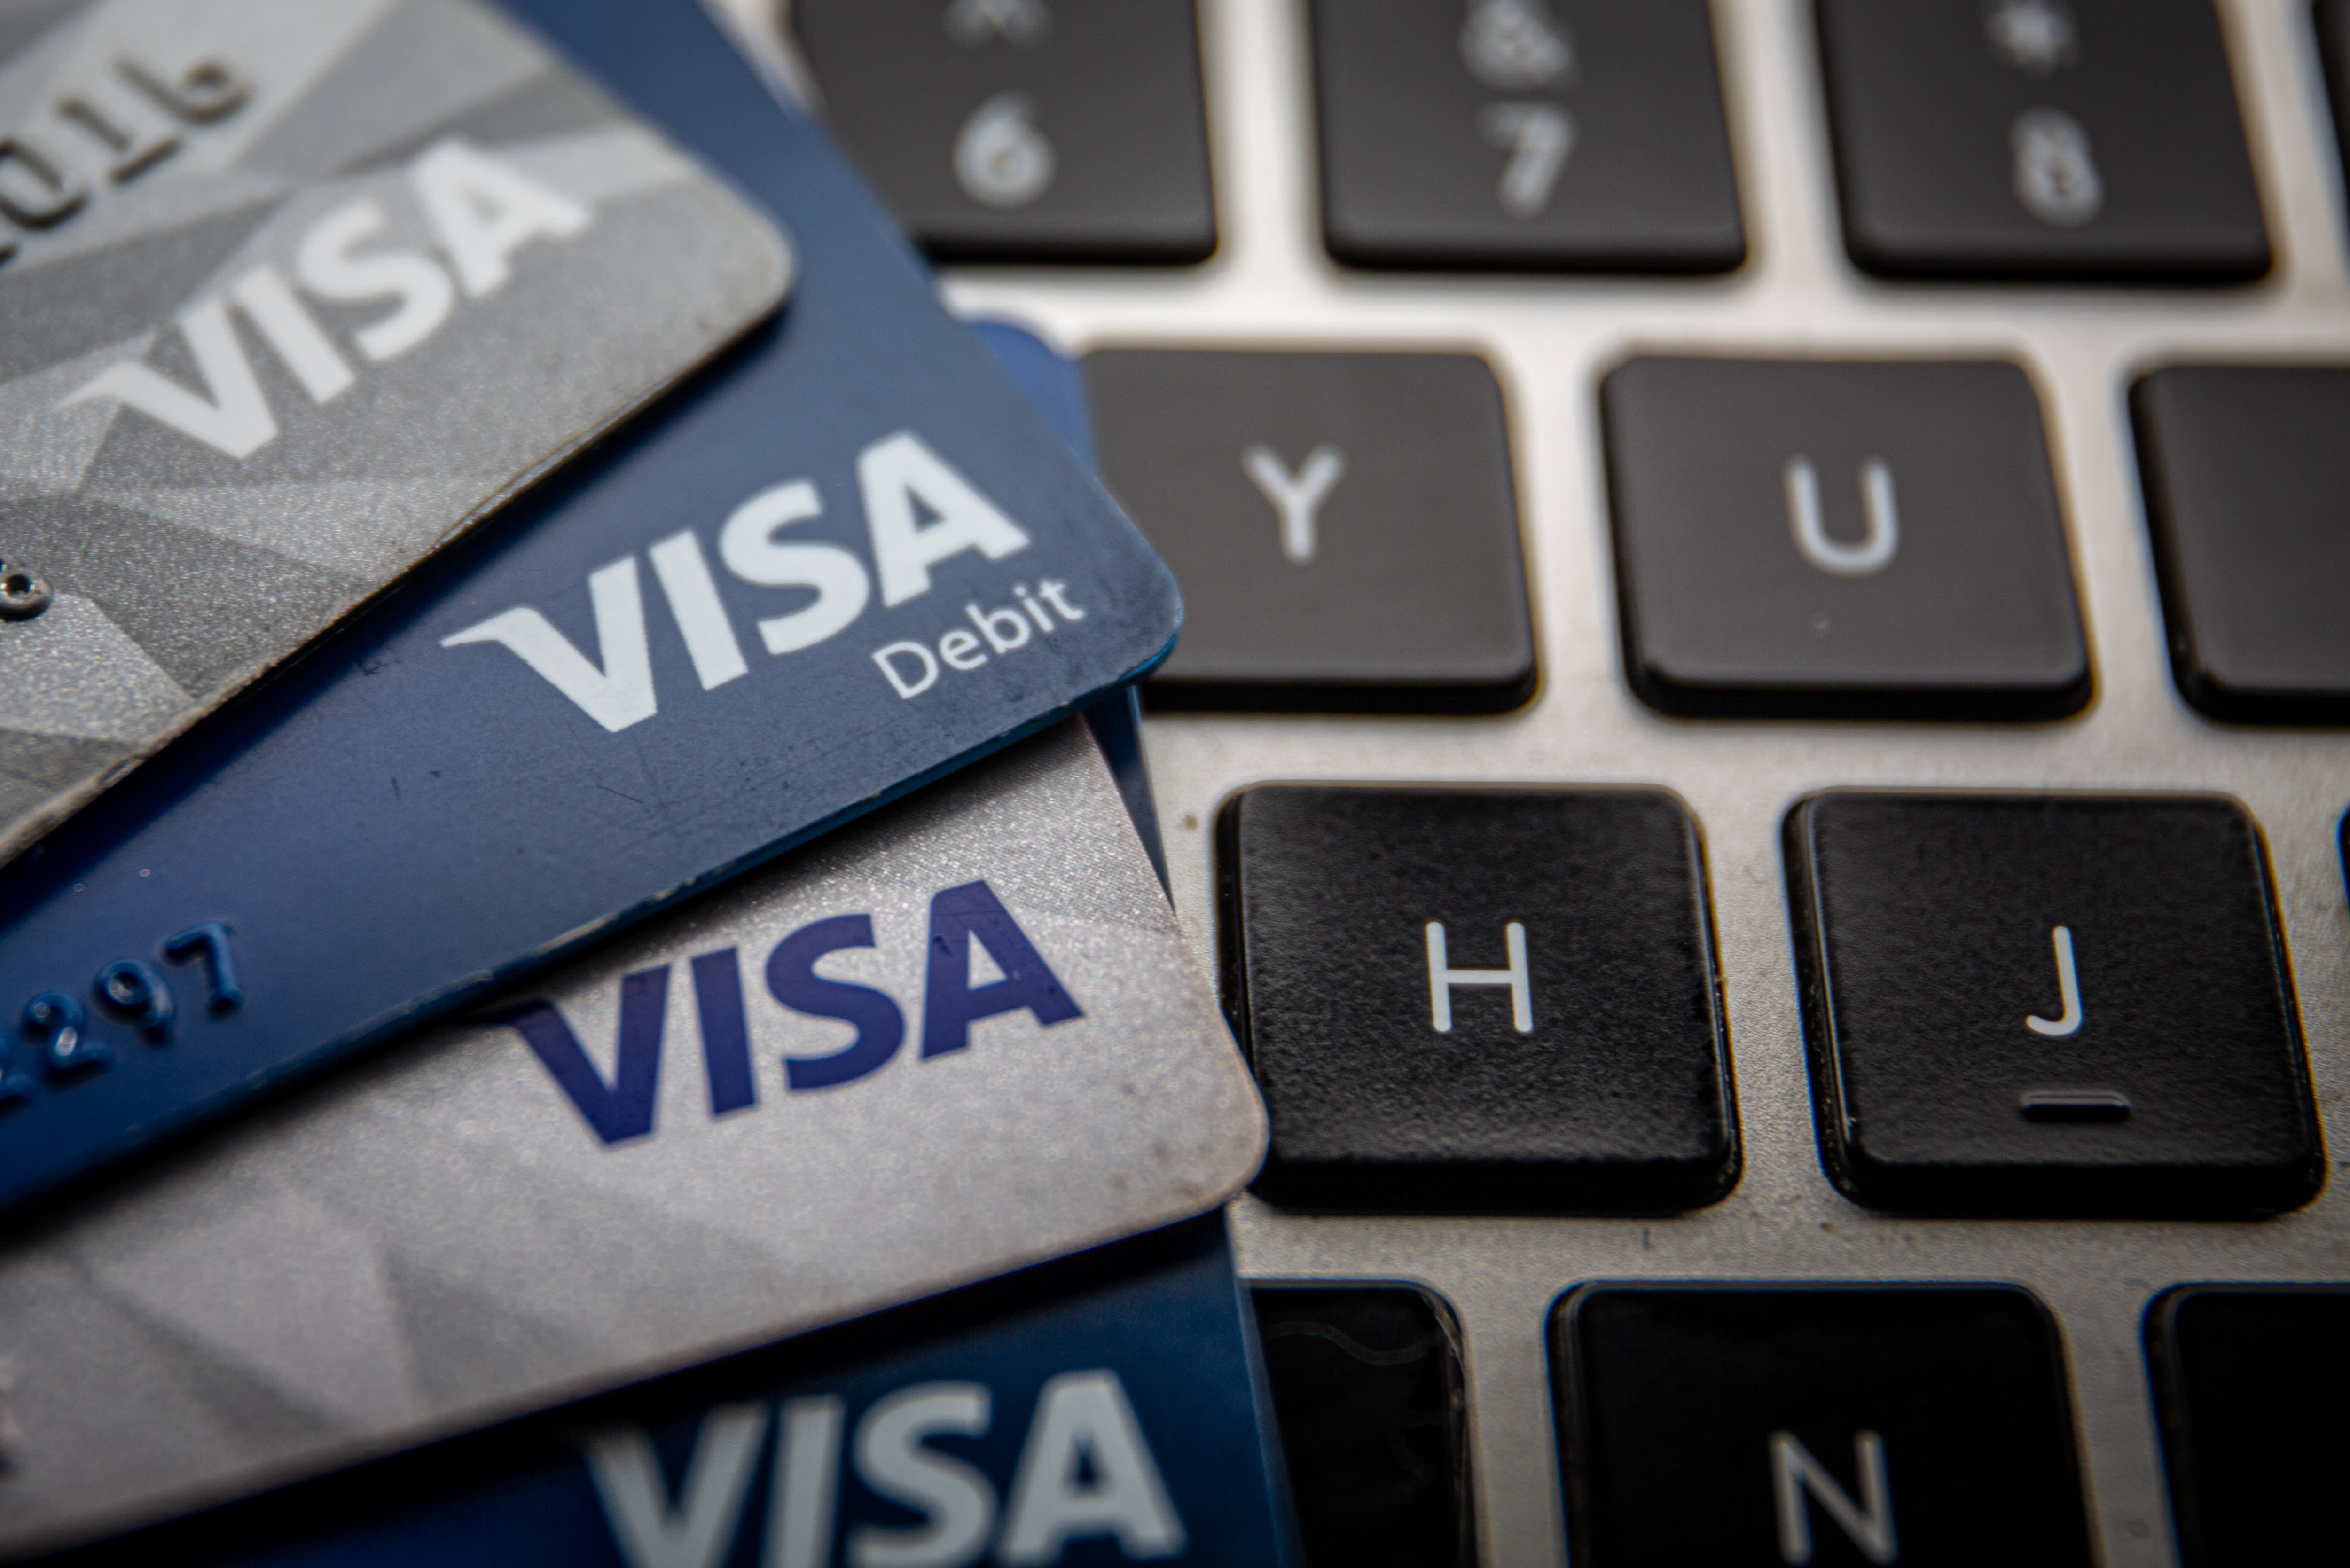 Amazon and Visa reach global truce over credit card fees